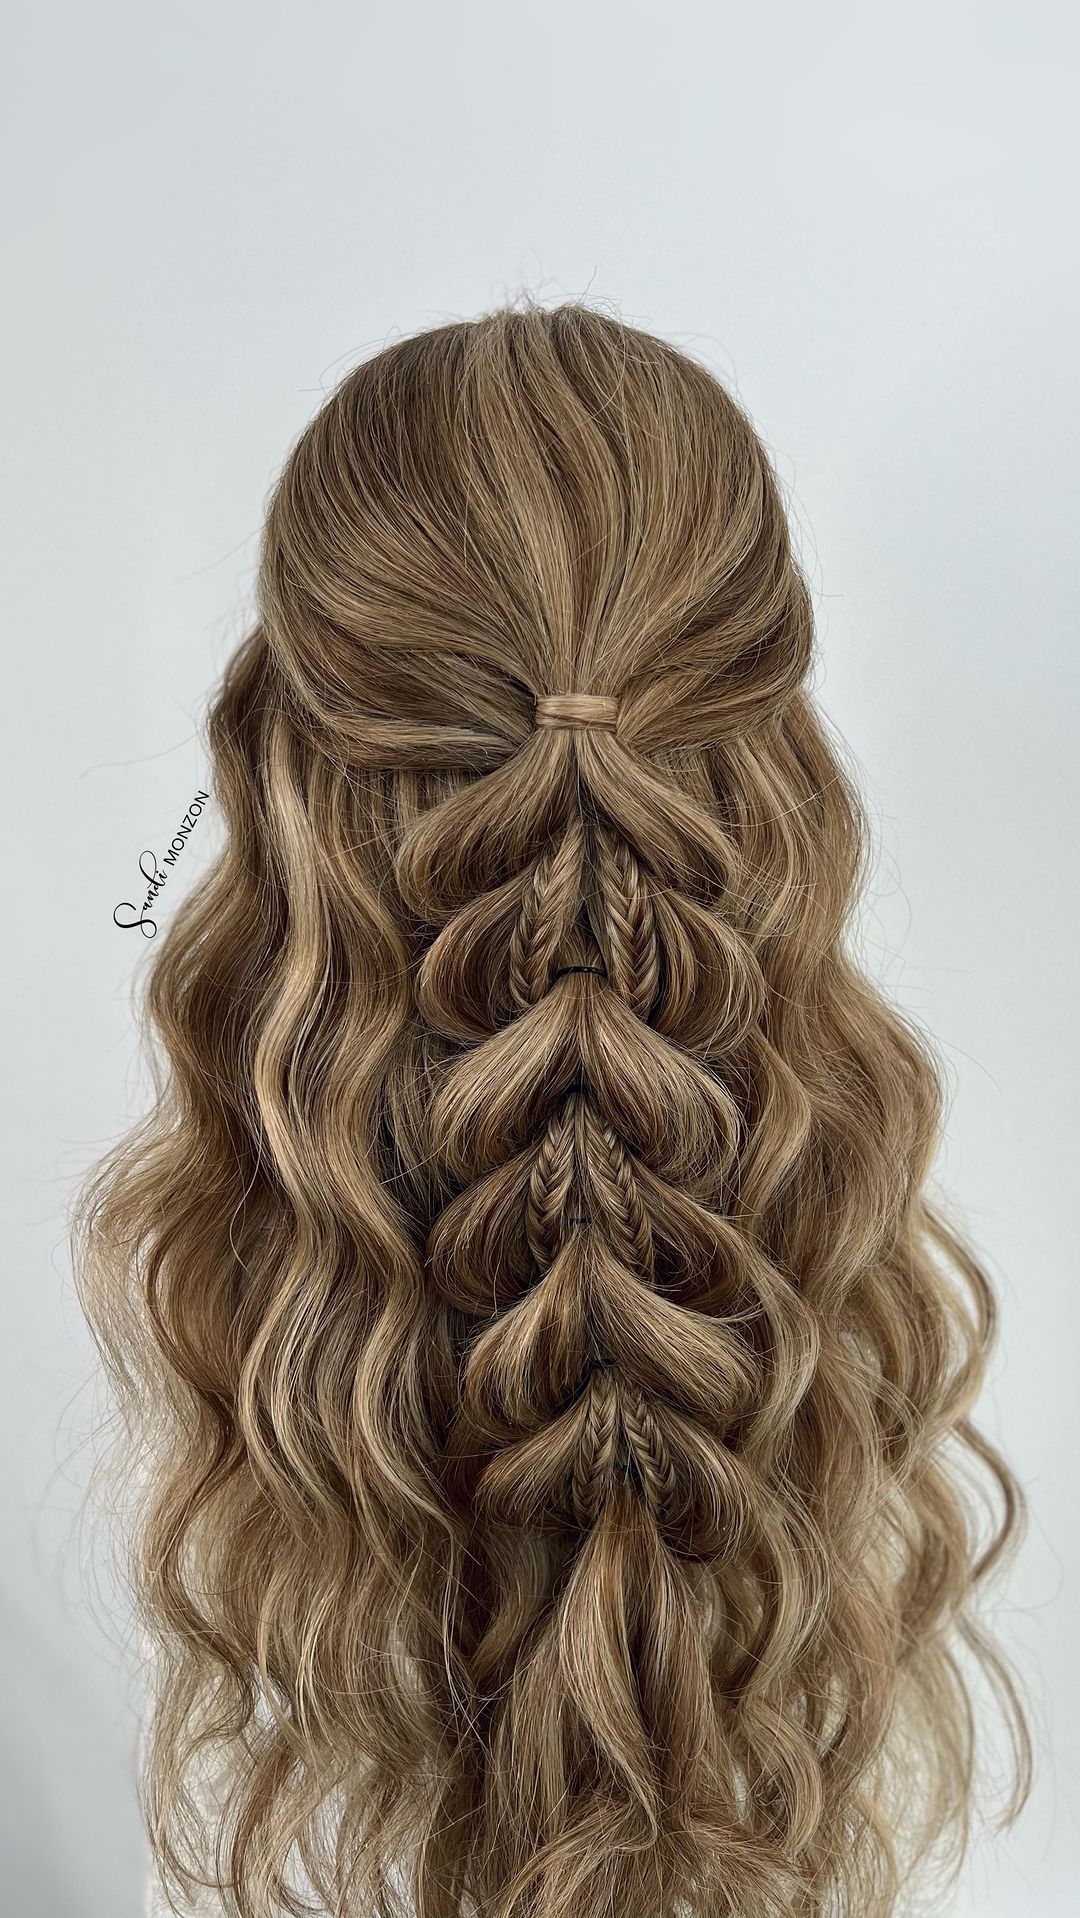 Stunning Hairstyle Ideas for Prom that Will Turn Heads